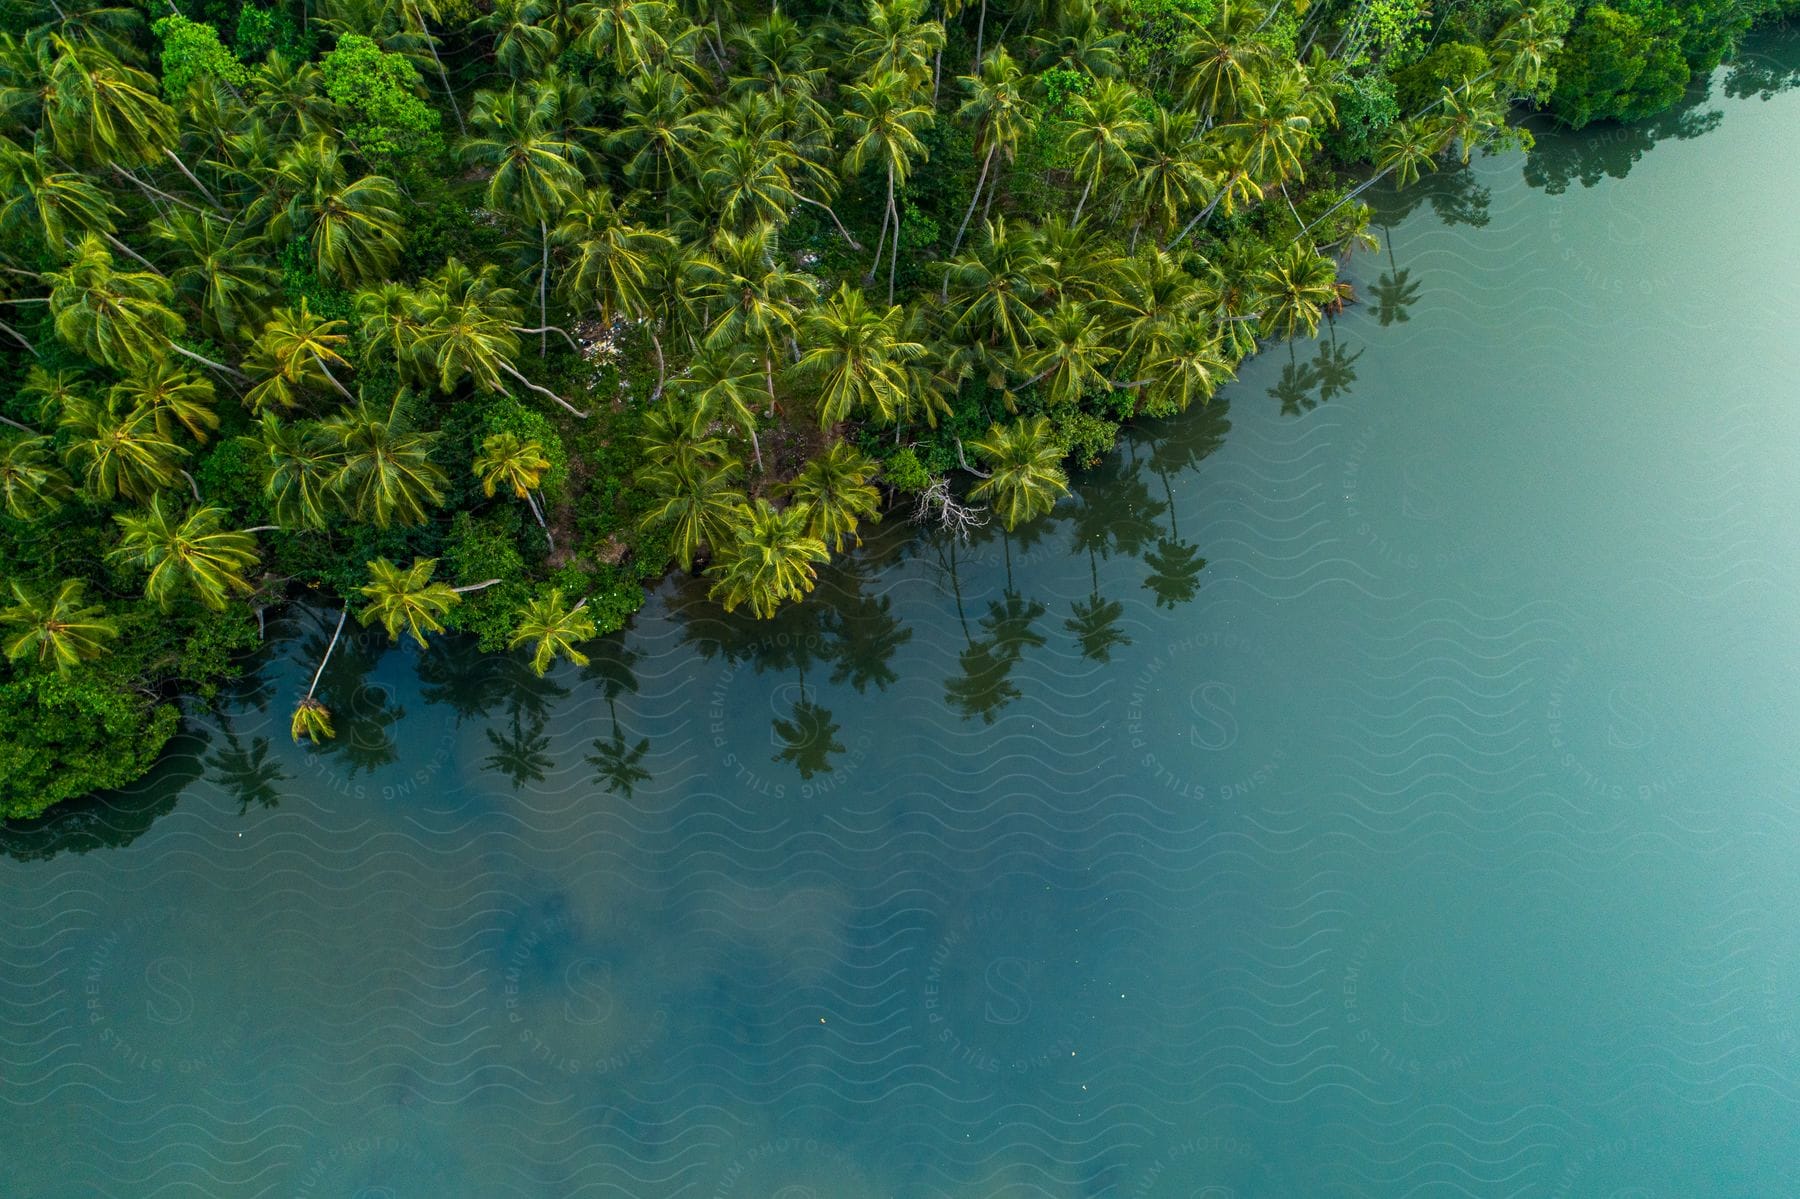 Aerial of a dense tropical forest of palm trees on the edge of a calm, clear body of water.